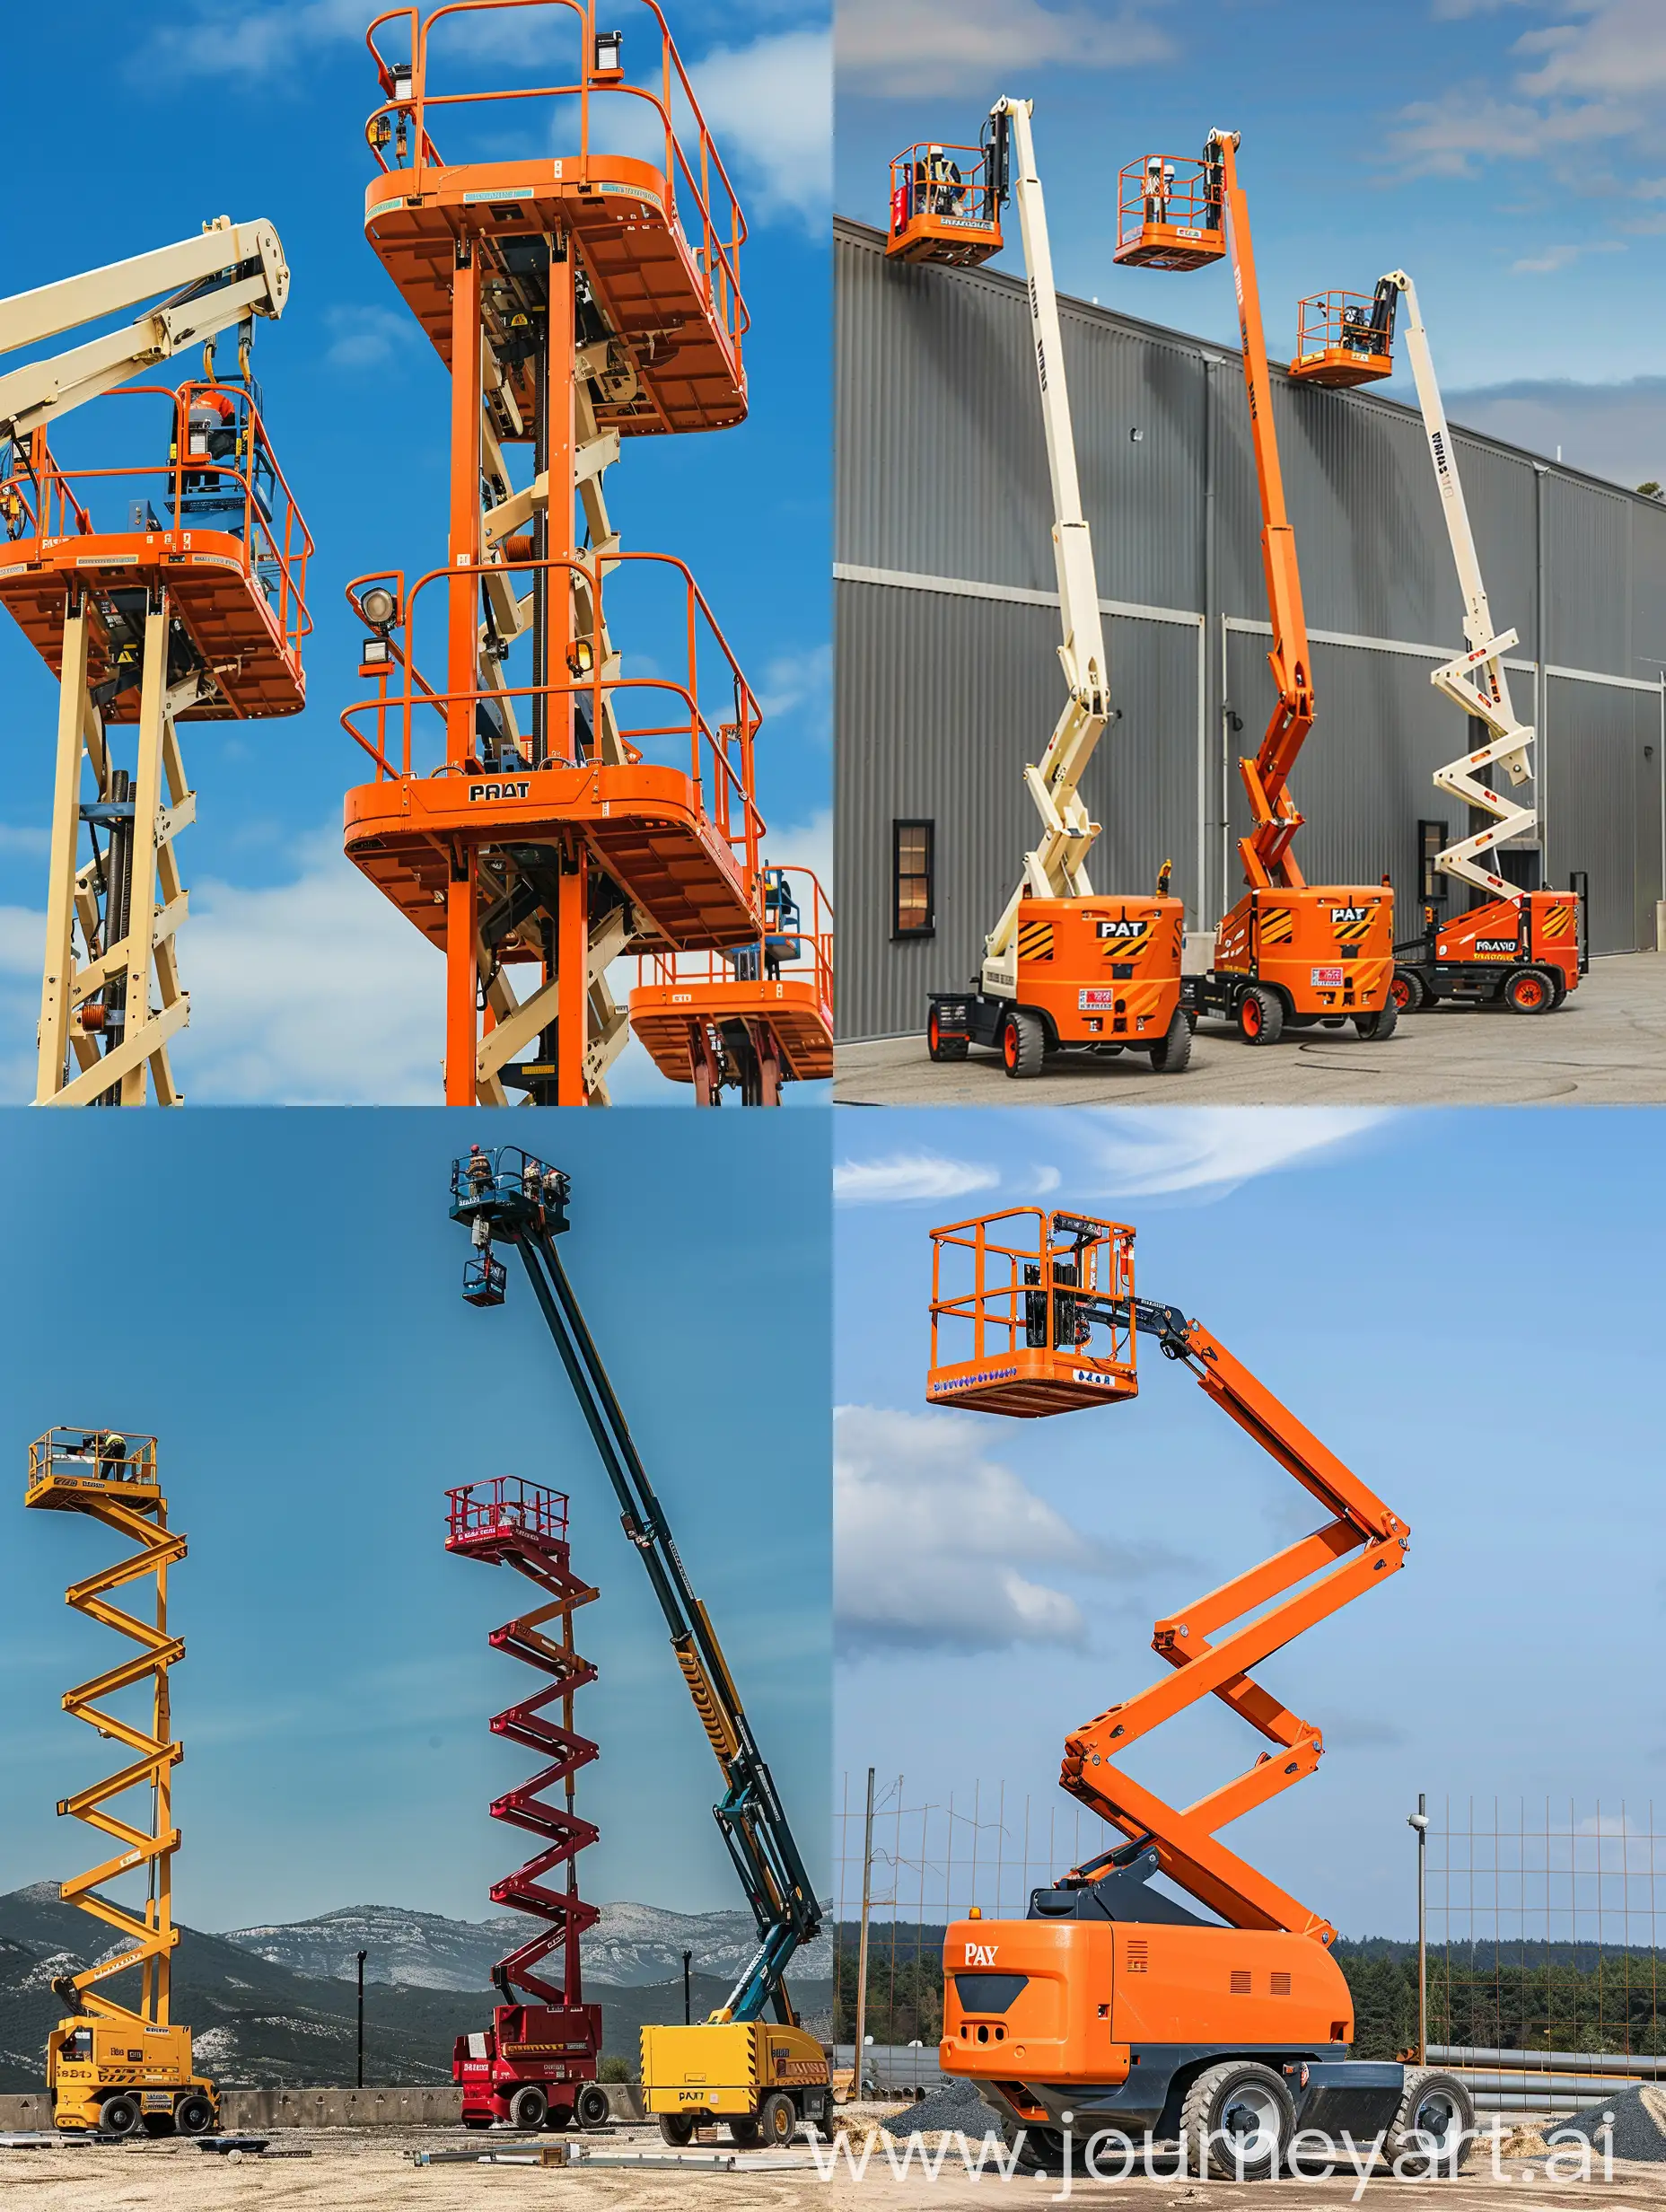 PAV lifts, Cherry pickers, Boom lifts operating onsite